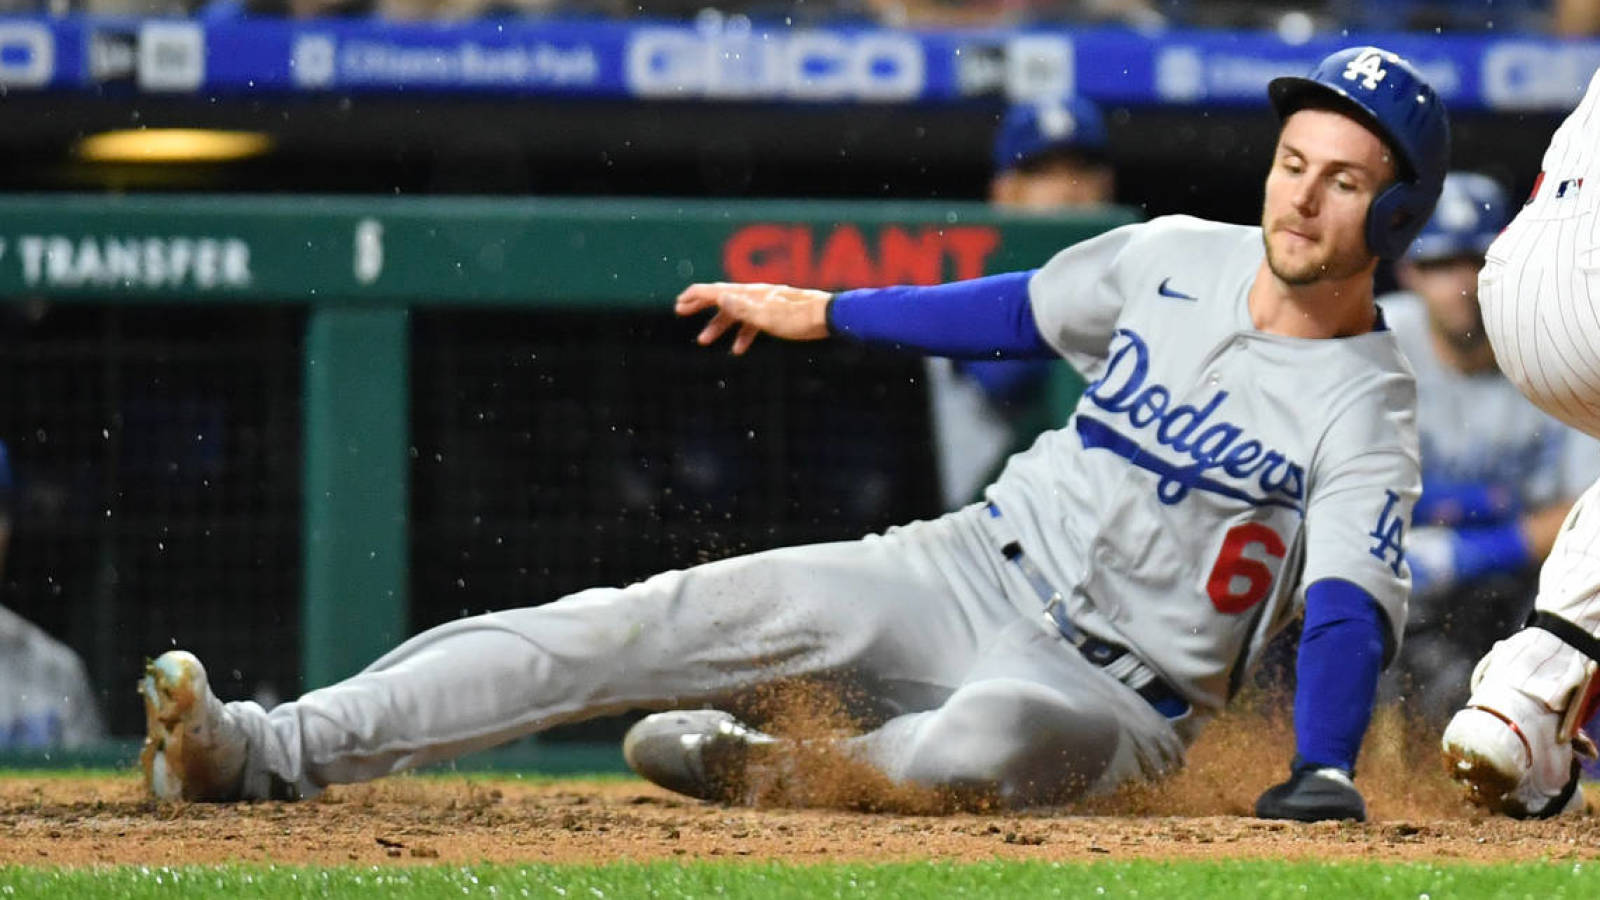 Dodgers' Trea Turner Pulls off the Coolest, Most Gravity-Defying